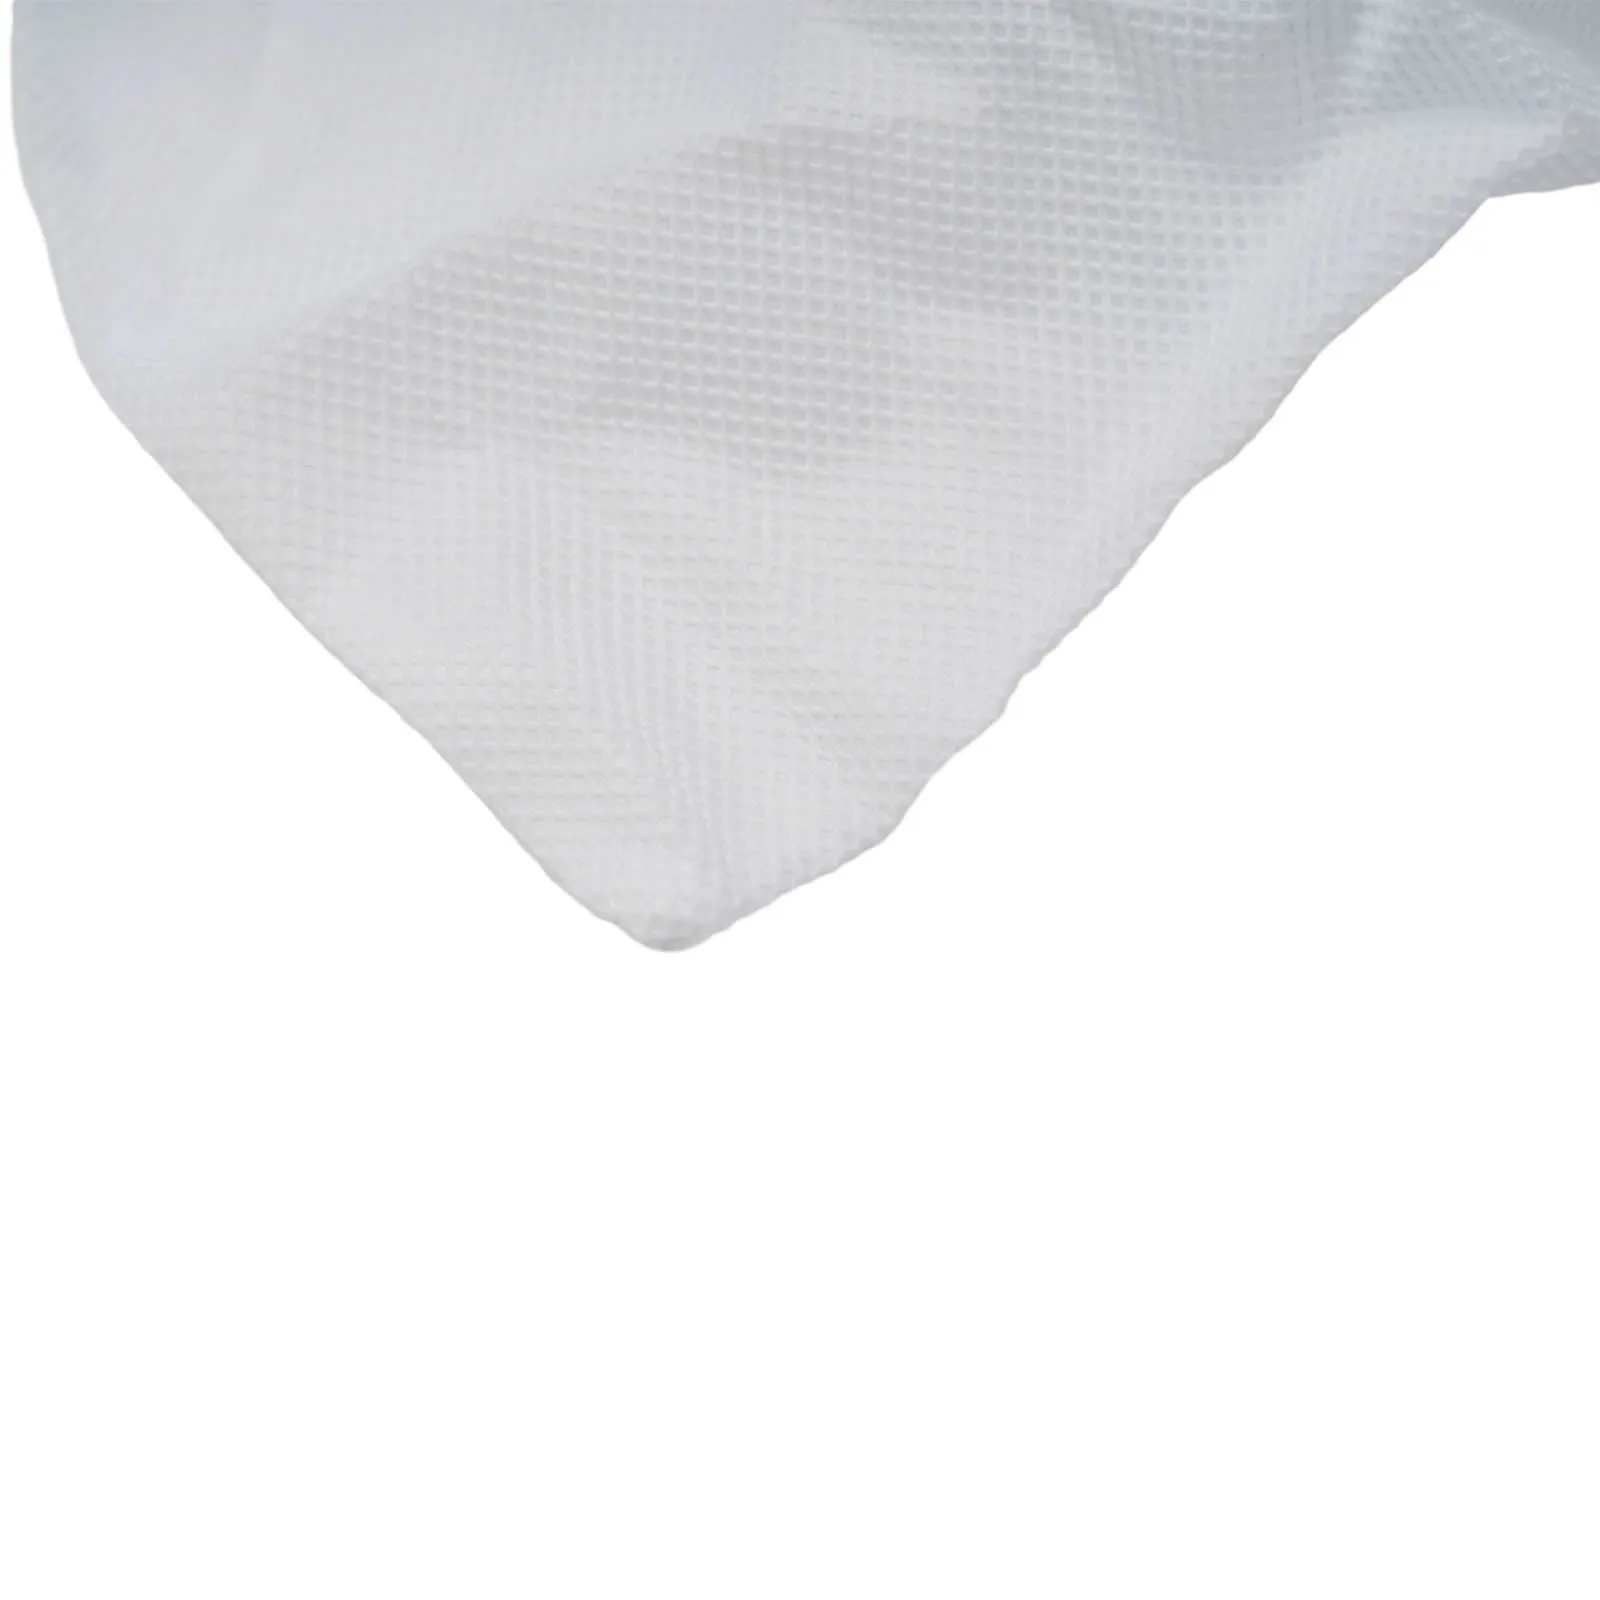 More Durable Practical Washable Brand New Washable Dust Bag Dust Bags 166084-9 For Makita CL100/106/180 DCL180